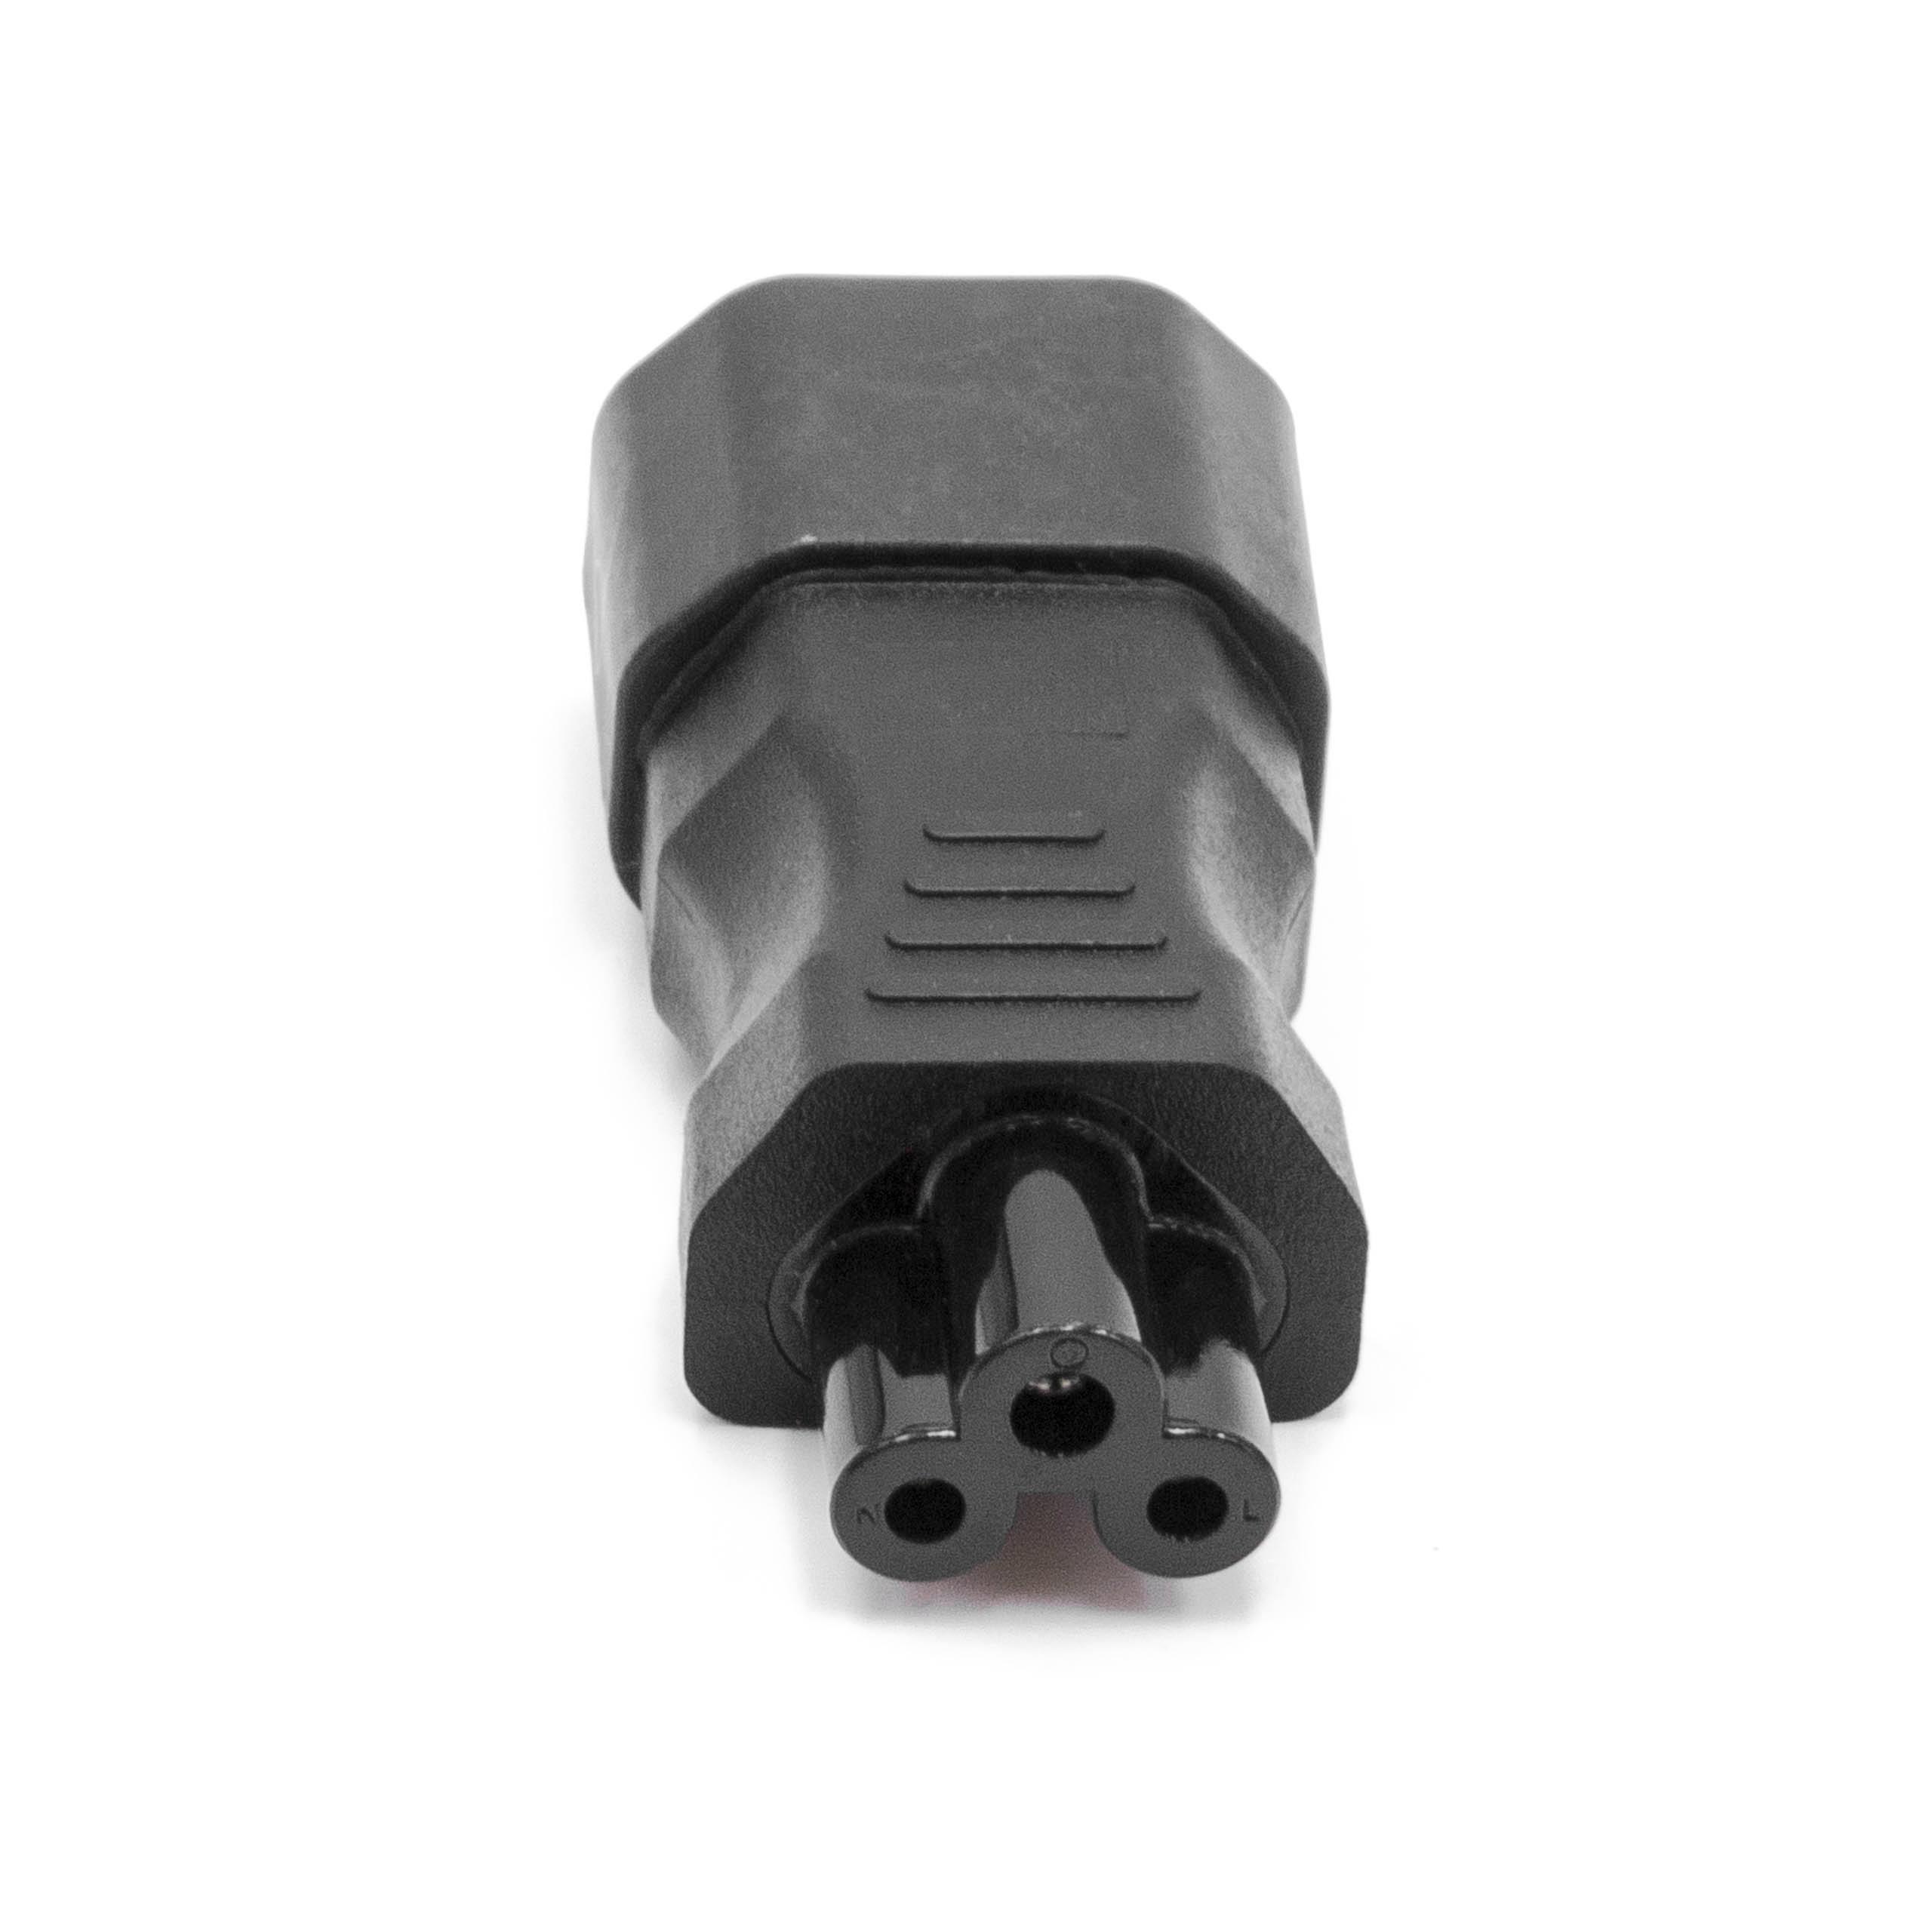 vhbw C14 (Male) to C5 (Female) Adapter for various Small Devices - IEC 320 Power Adapter Black